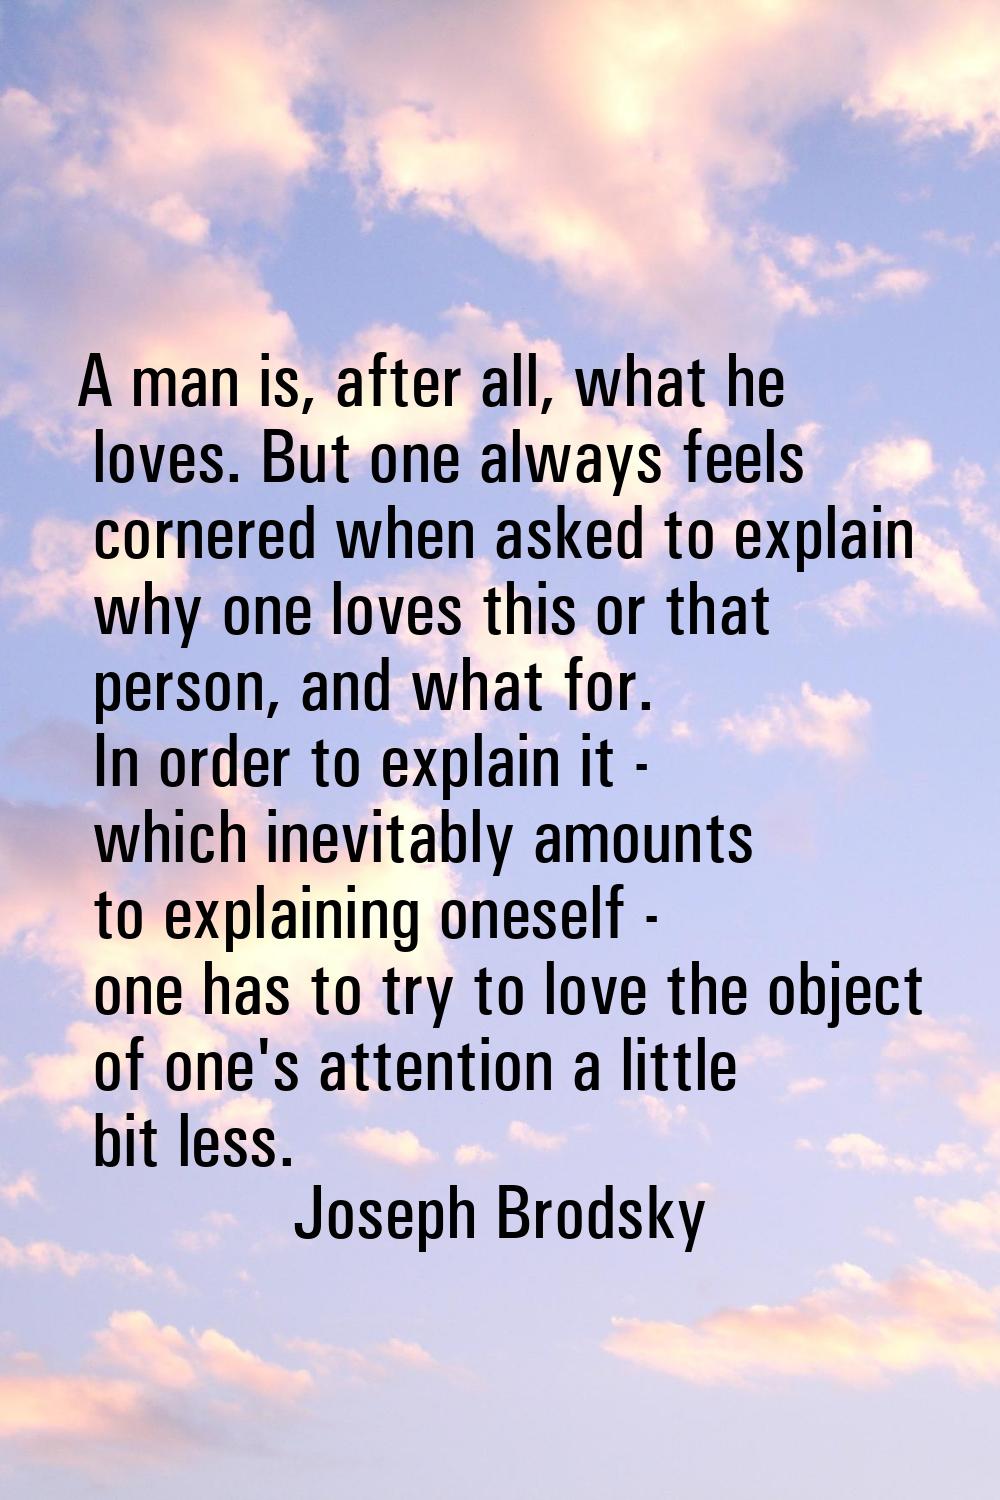 A man is, after all, what he loves. But one always feels cornered when asked to explain why one lov